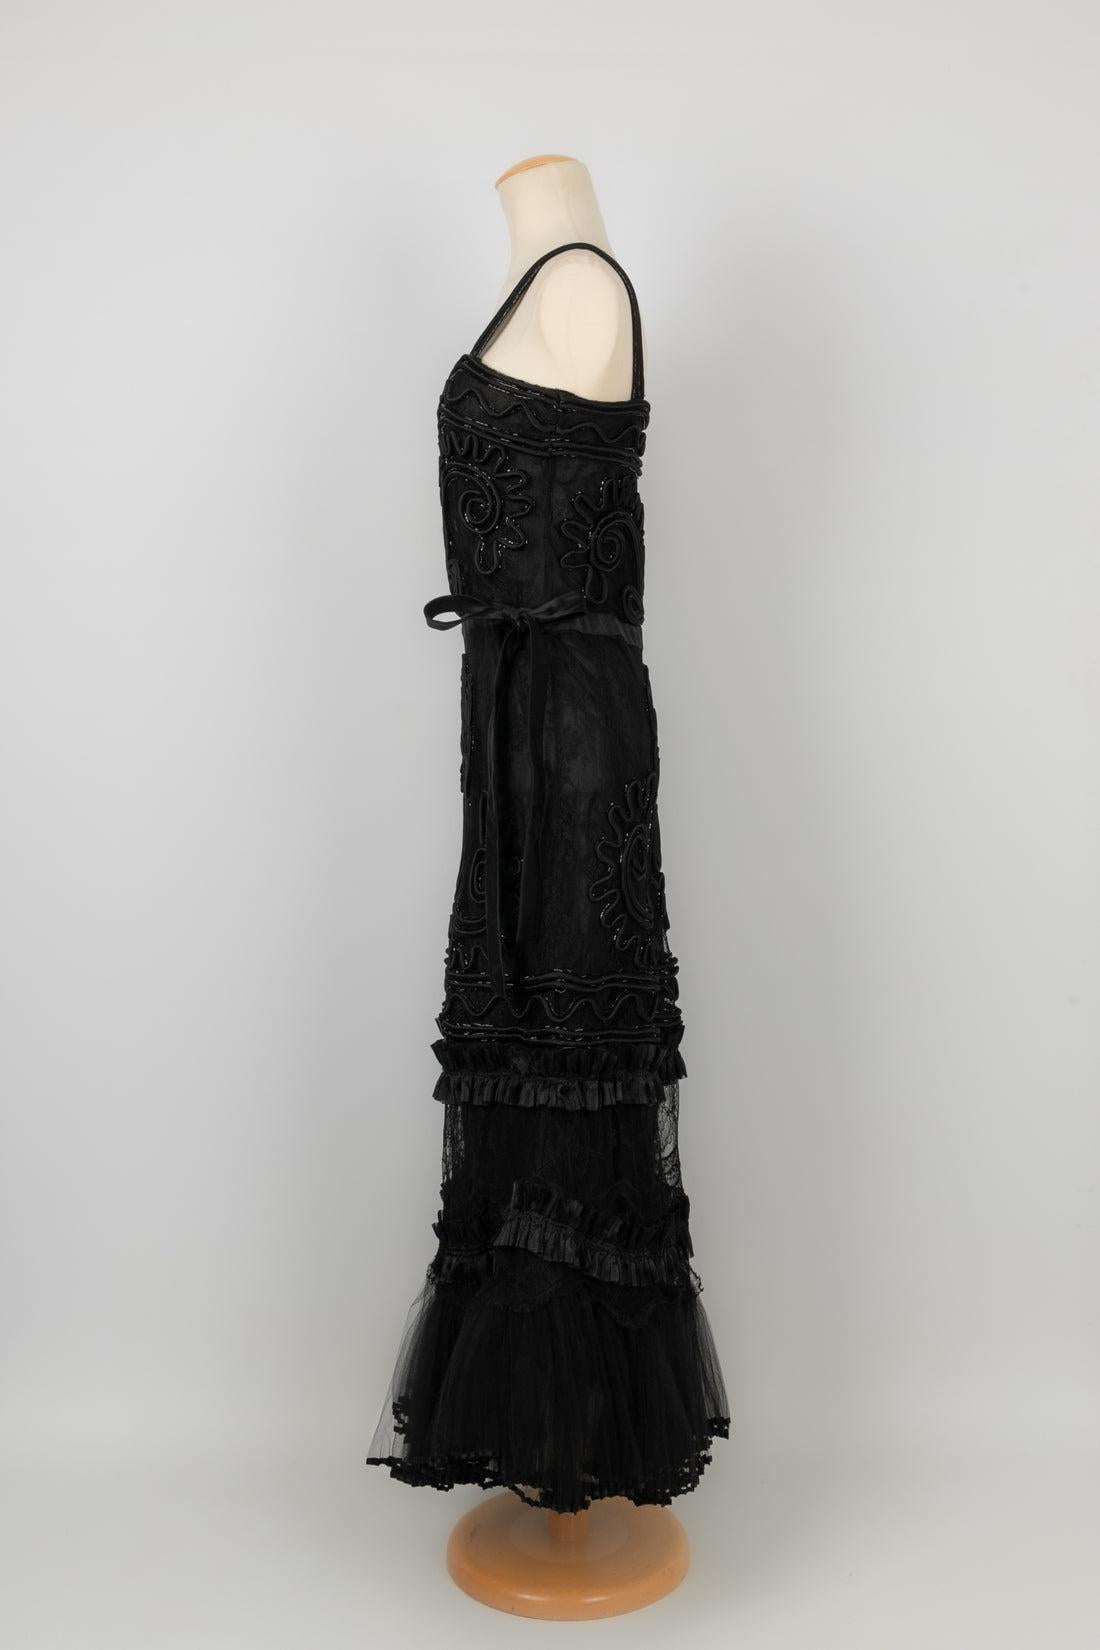 Valentino - Black lace dress embroidered with floral patterns made of sequins and silk topstitches. Size 40IT. 2010 Circa.

Additional information:
Condition: Very good condition
Dimensions: Chest: 39 cm - Waist: 37 cm - Length: 145 cm
Period: 21st